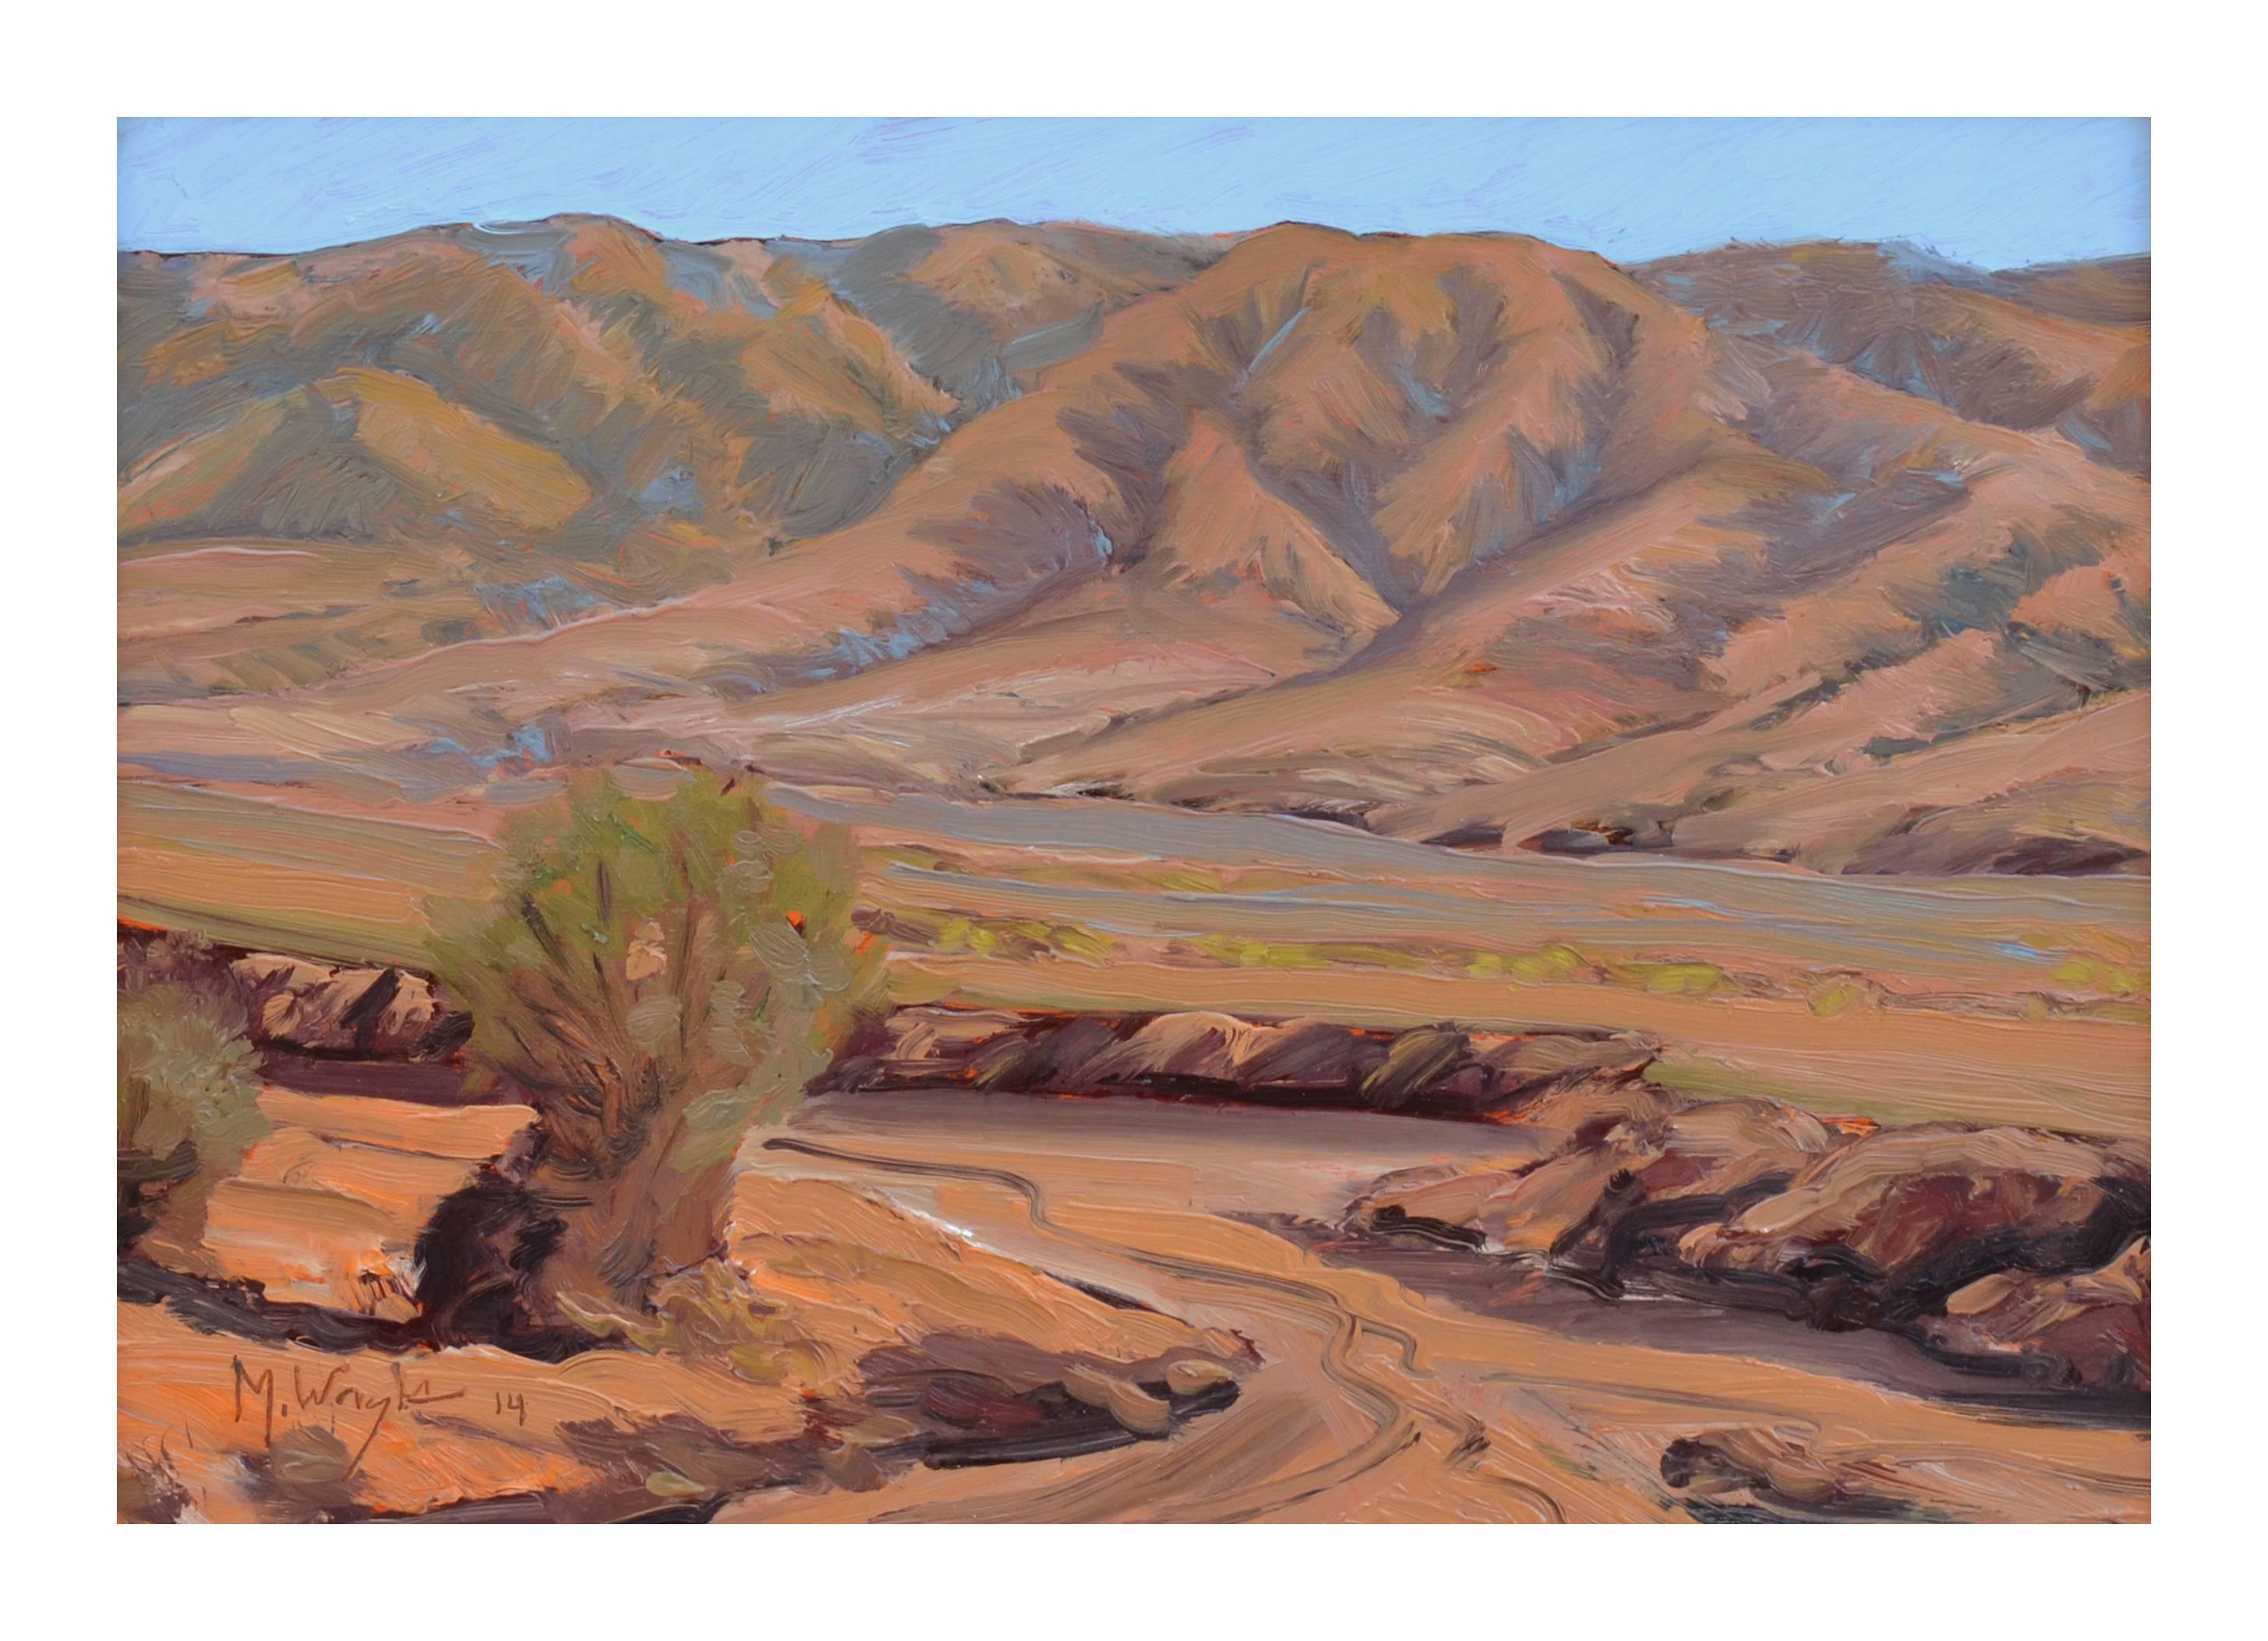 South of Death Valley - Desert Landscape - Painting by Mike Wright